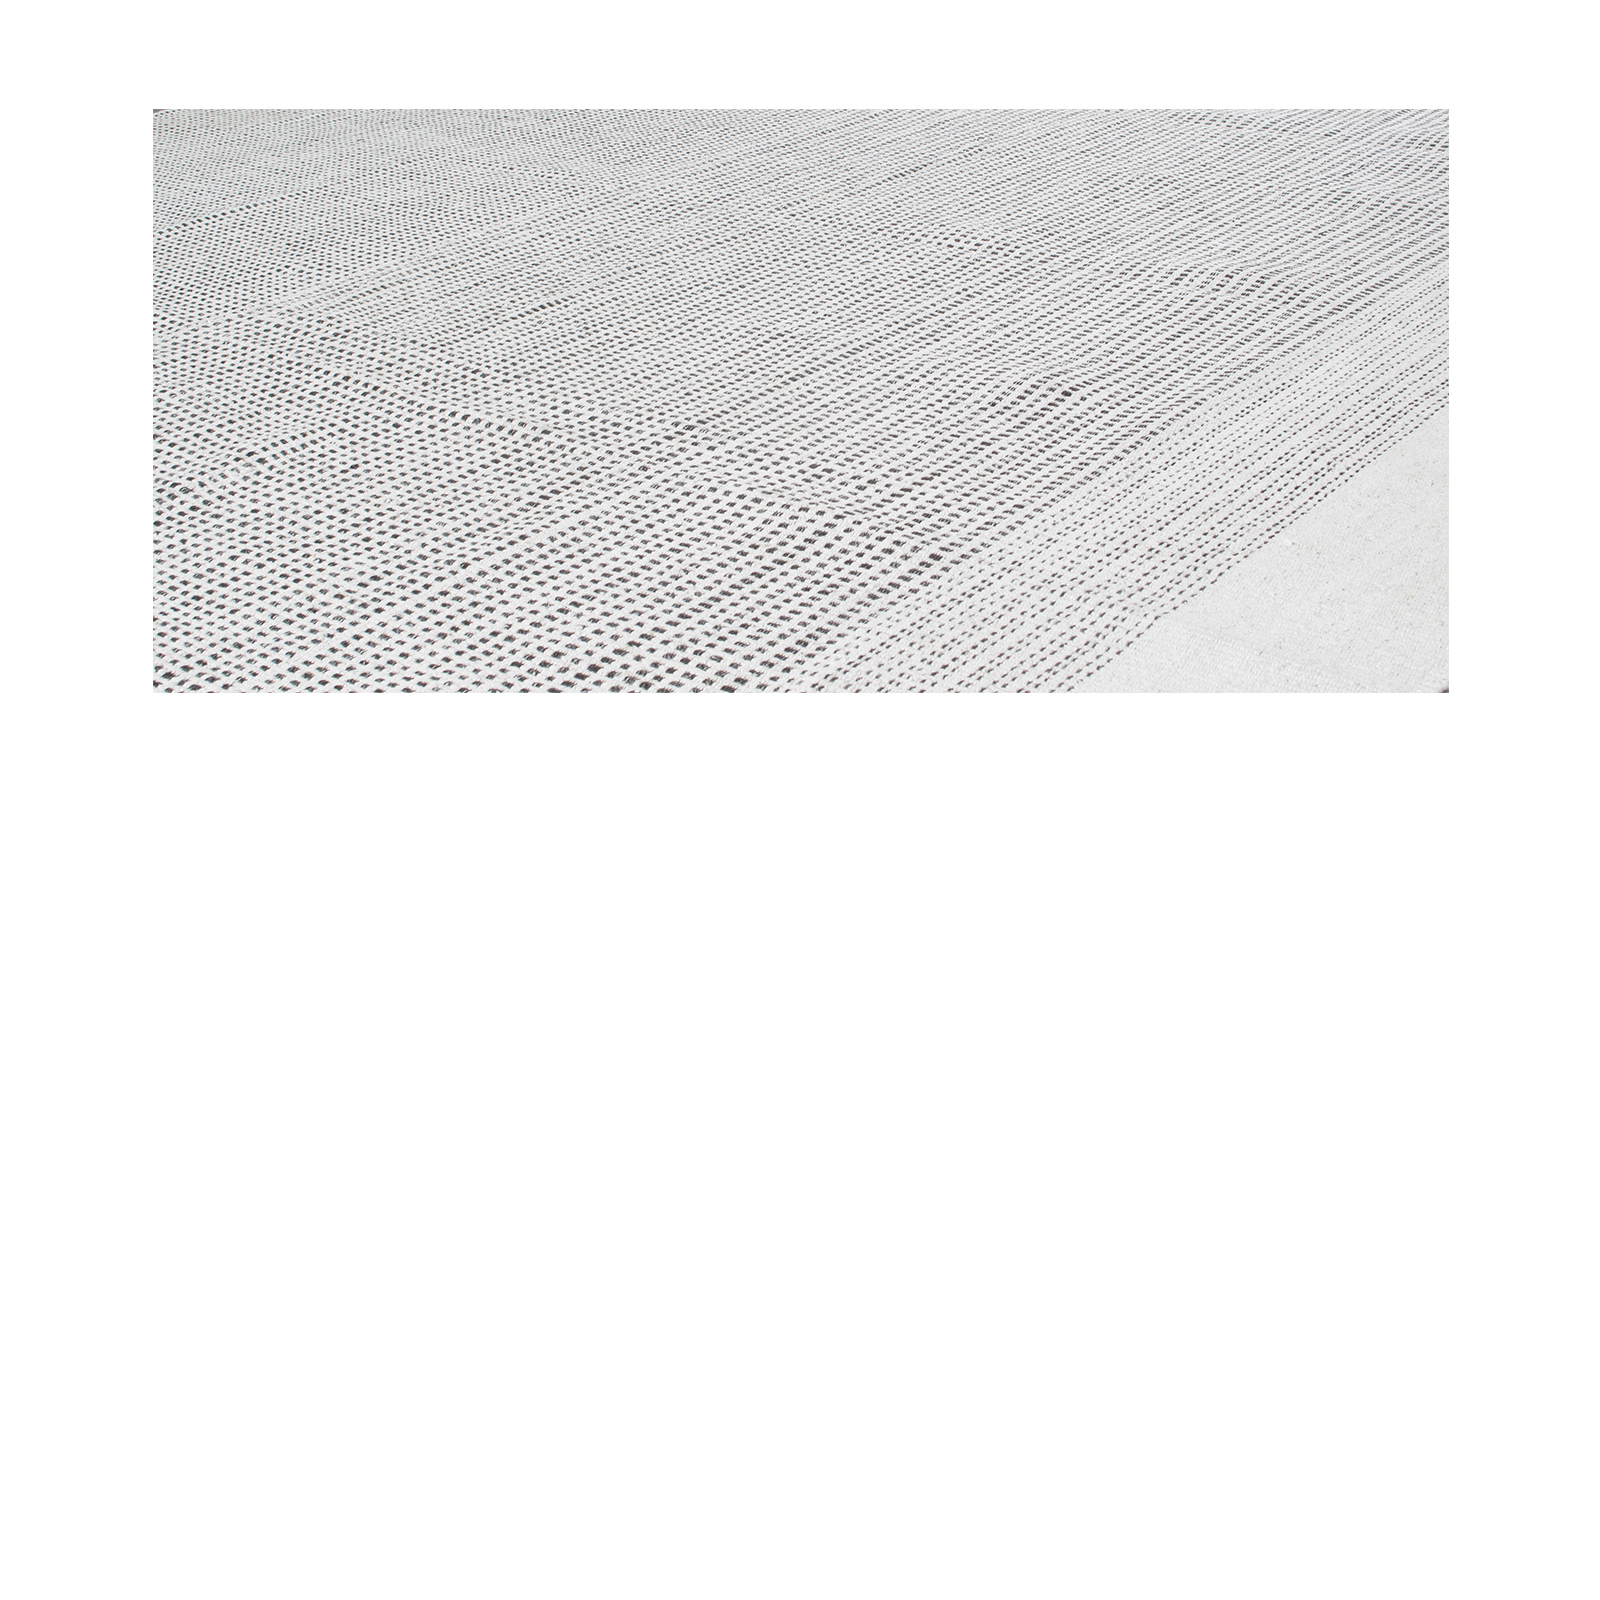 This Pelas/Alentejo flatweave rug is made with handspun wool and cotton and natural dyes.